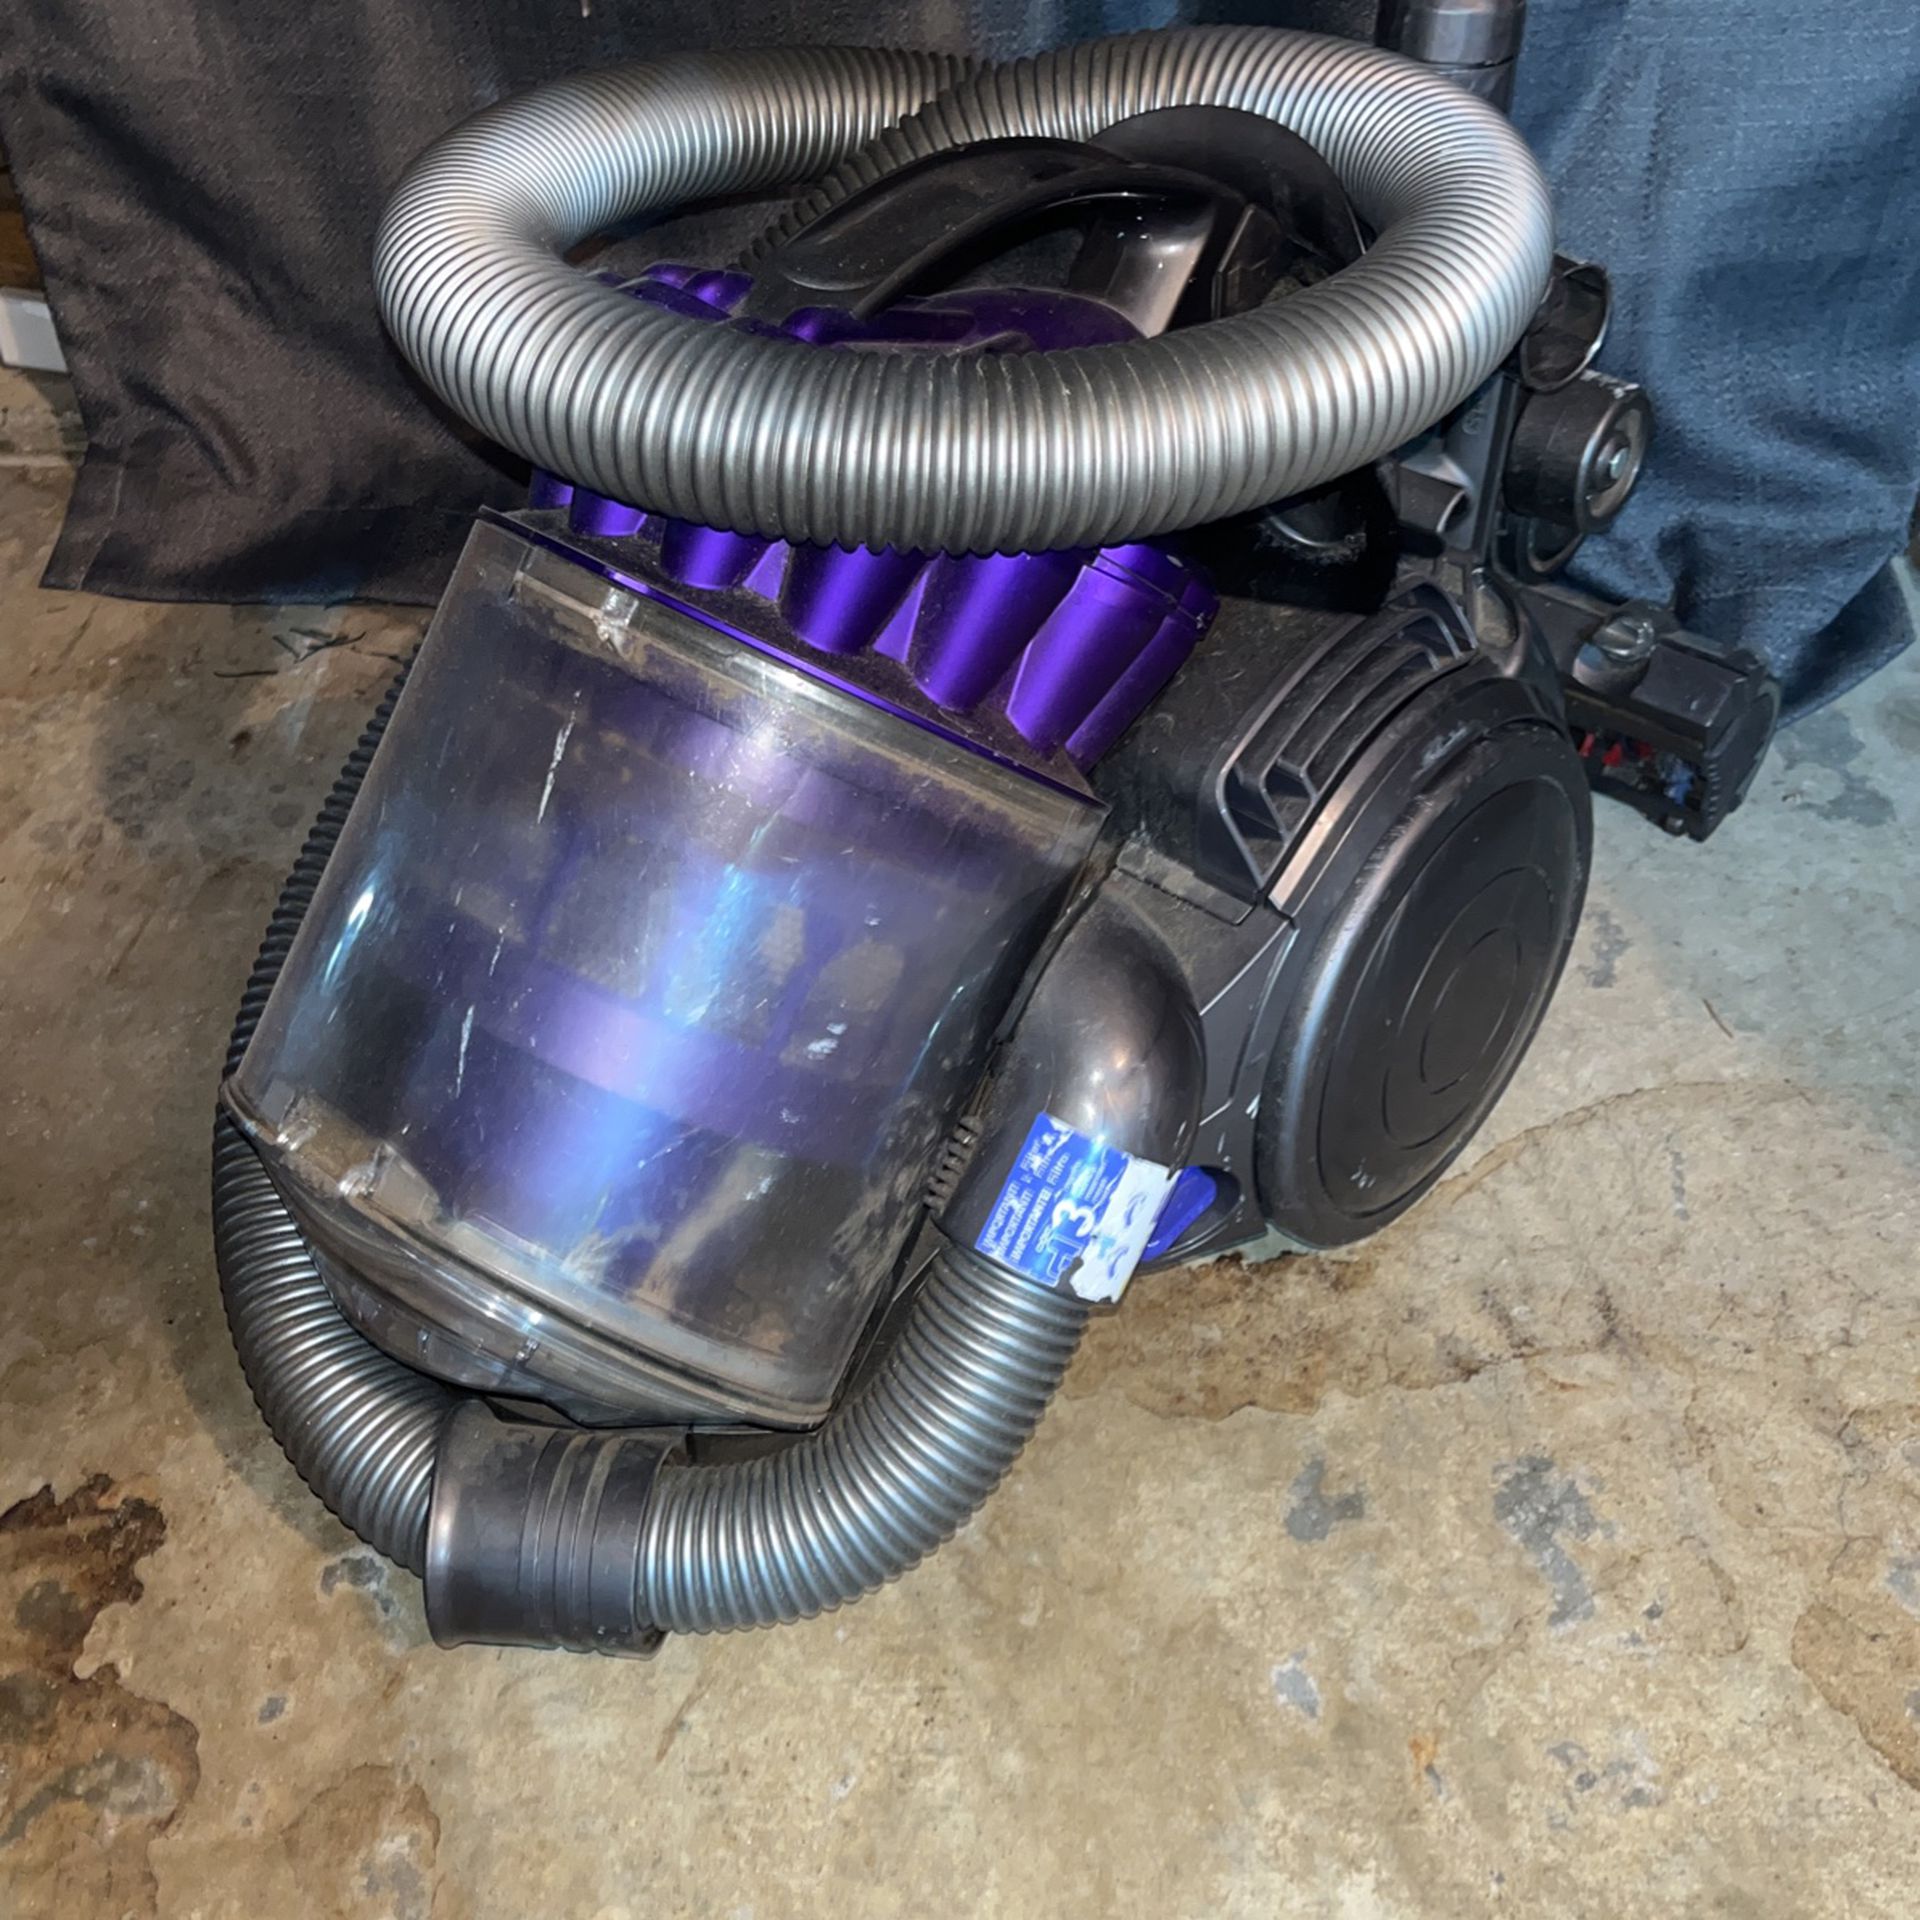 Dyson Bagless Canister Vacuum 